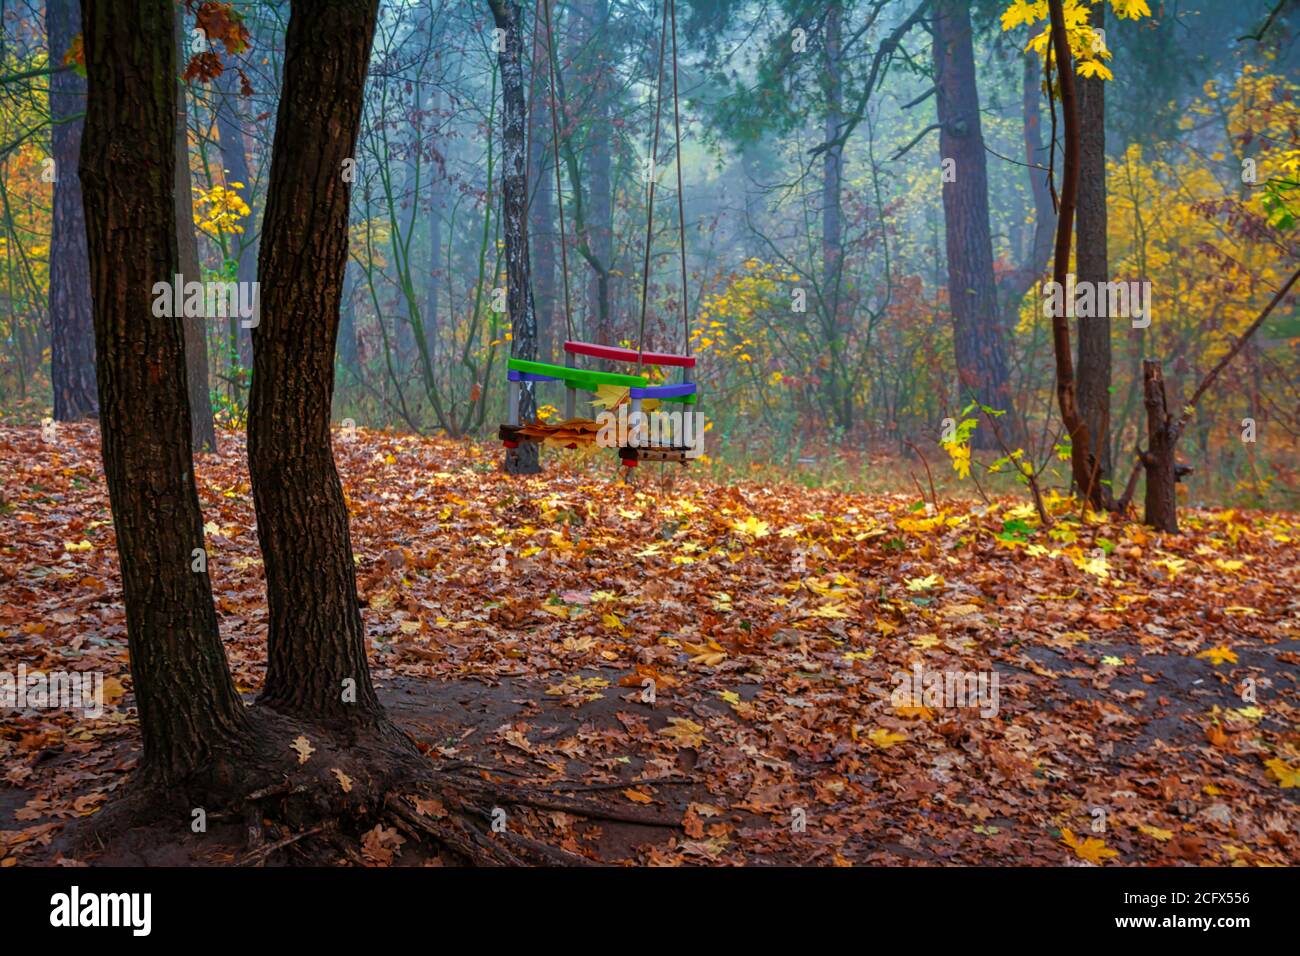 Forgotten children's swing on the background of an autumn park Stock Photo